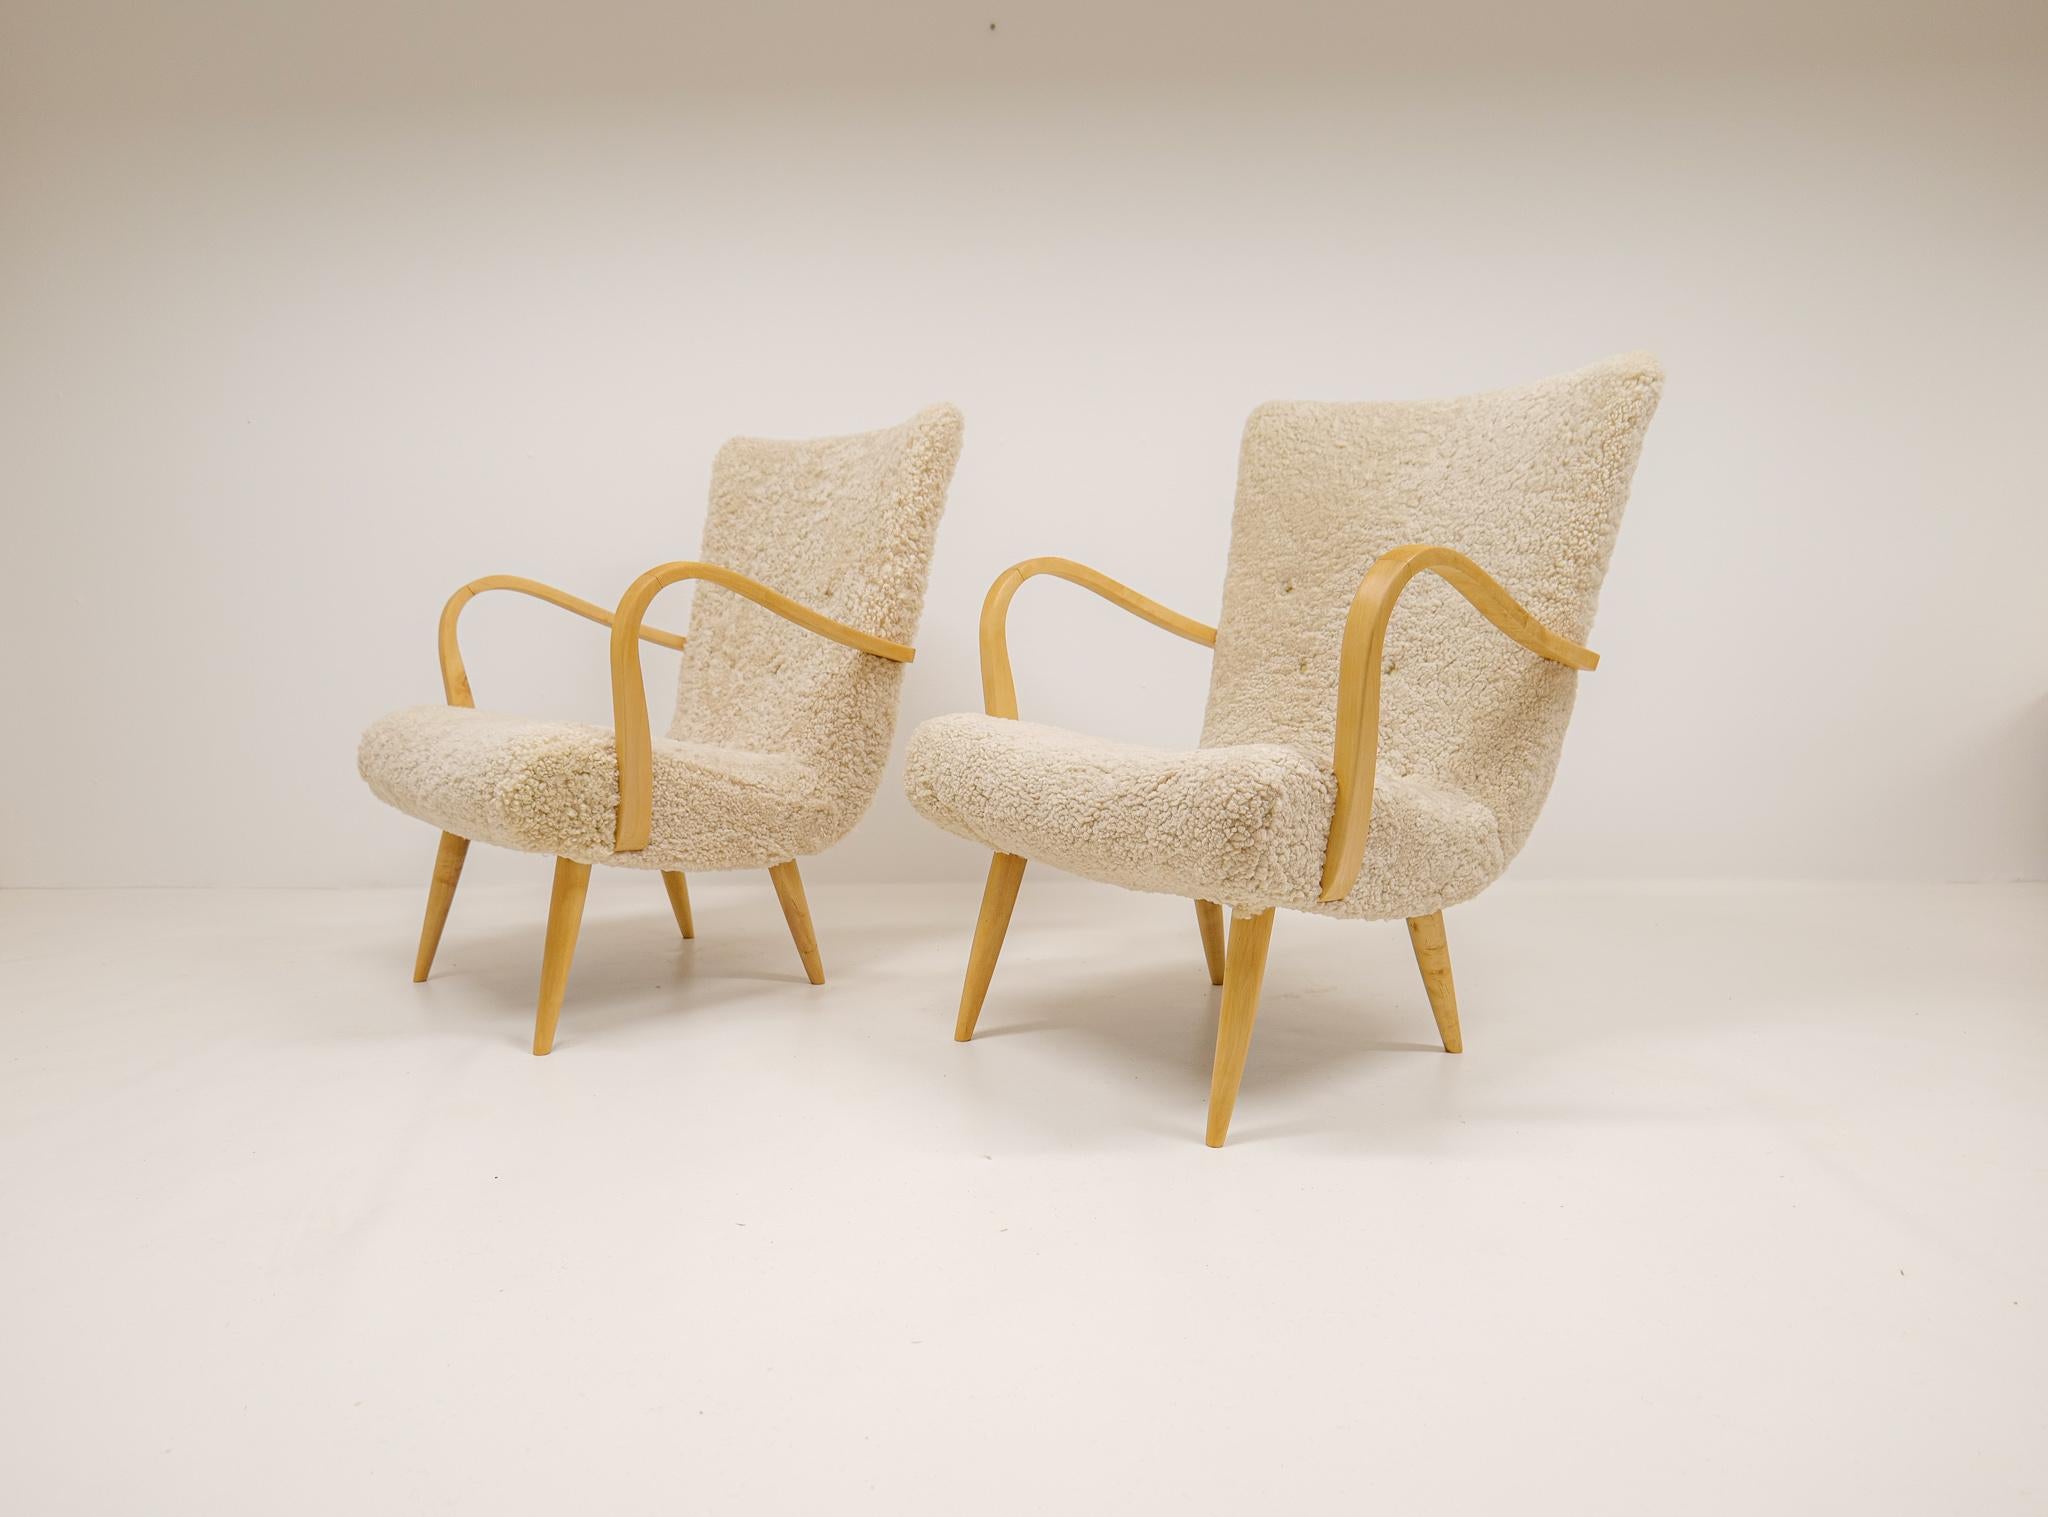 Swedish Midcentury Sculptural Lounge Chairs in Sheepskin Shearling Sweden 1950s